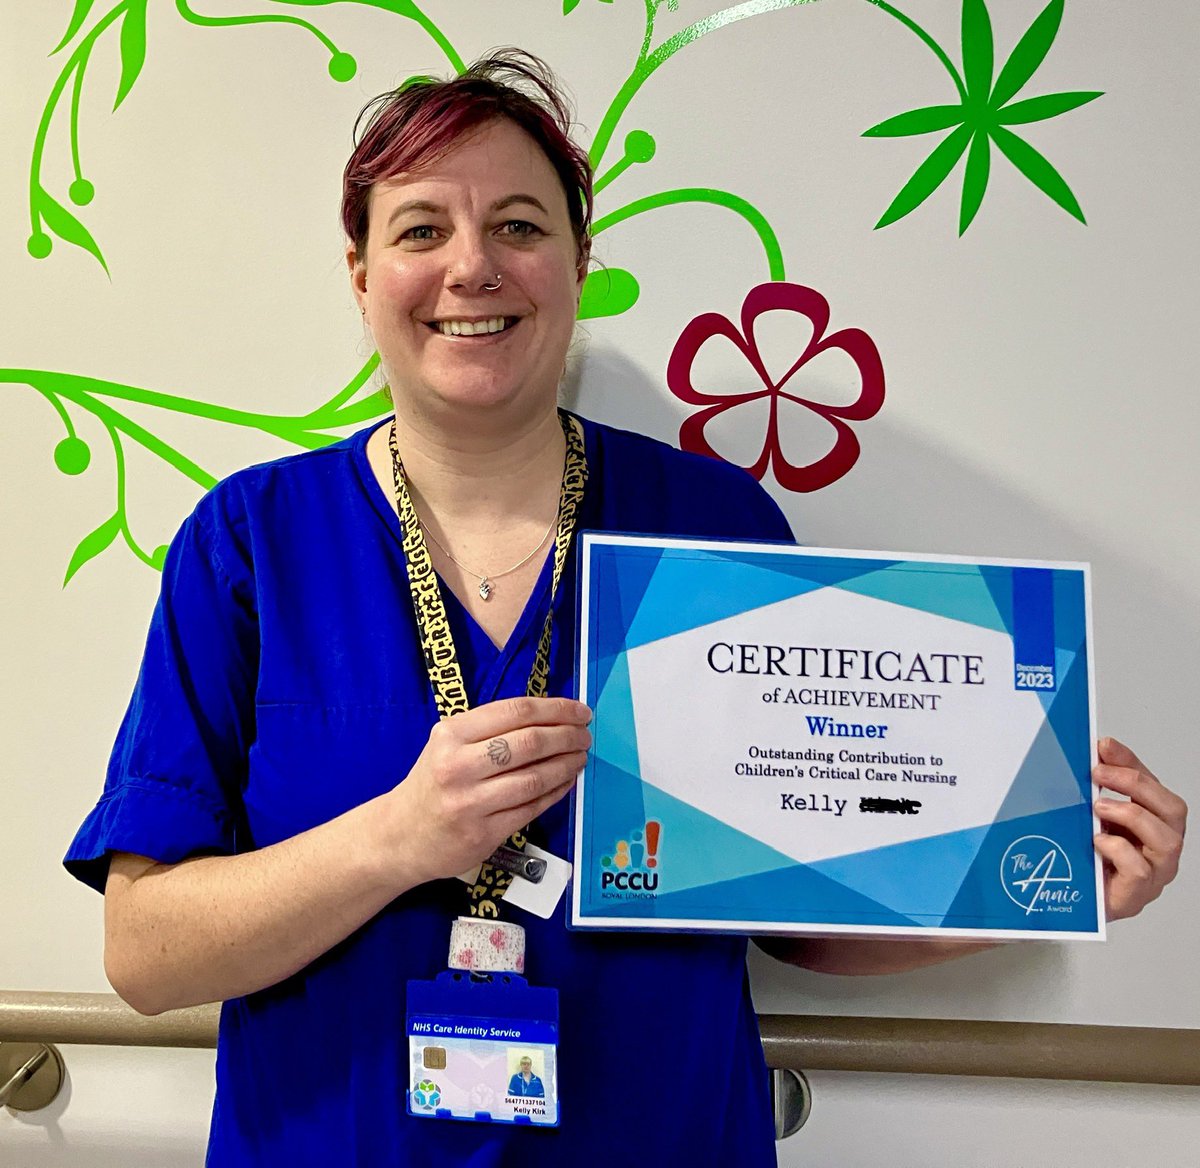 Congratulations to Kelly, who is our first winner of the Annie Award. Thank you to the PCCU parents who nominated. @FlissJMitch @RLHchildren @FIONAPARKER5 @KathEvans2